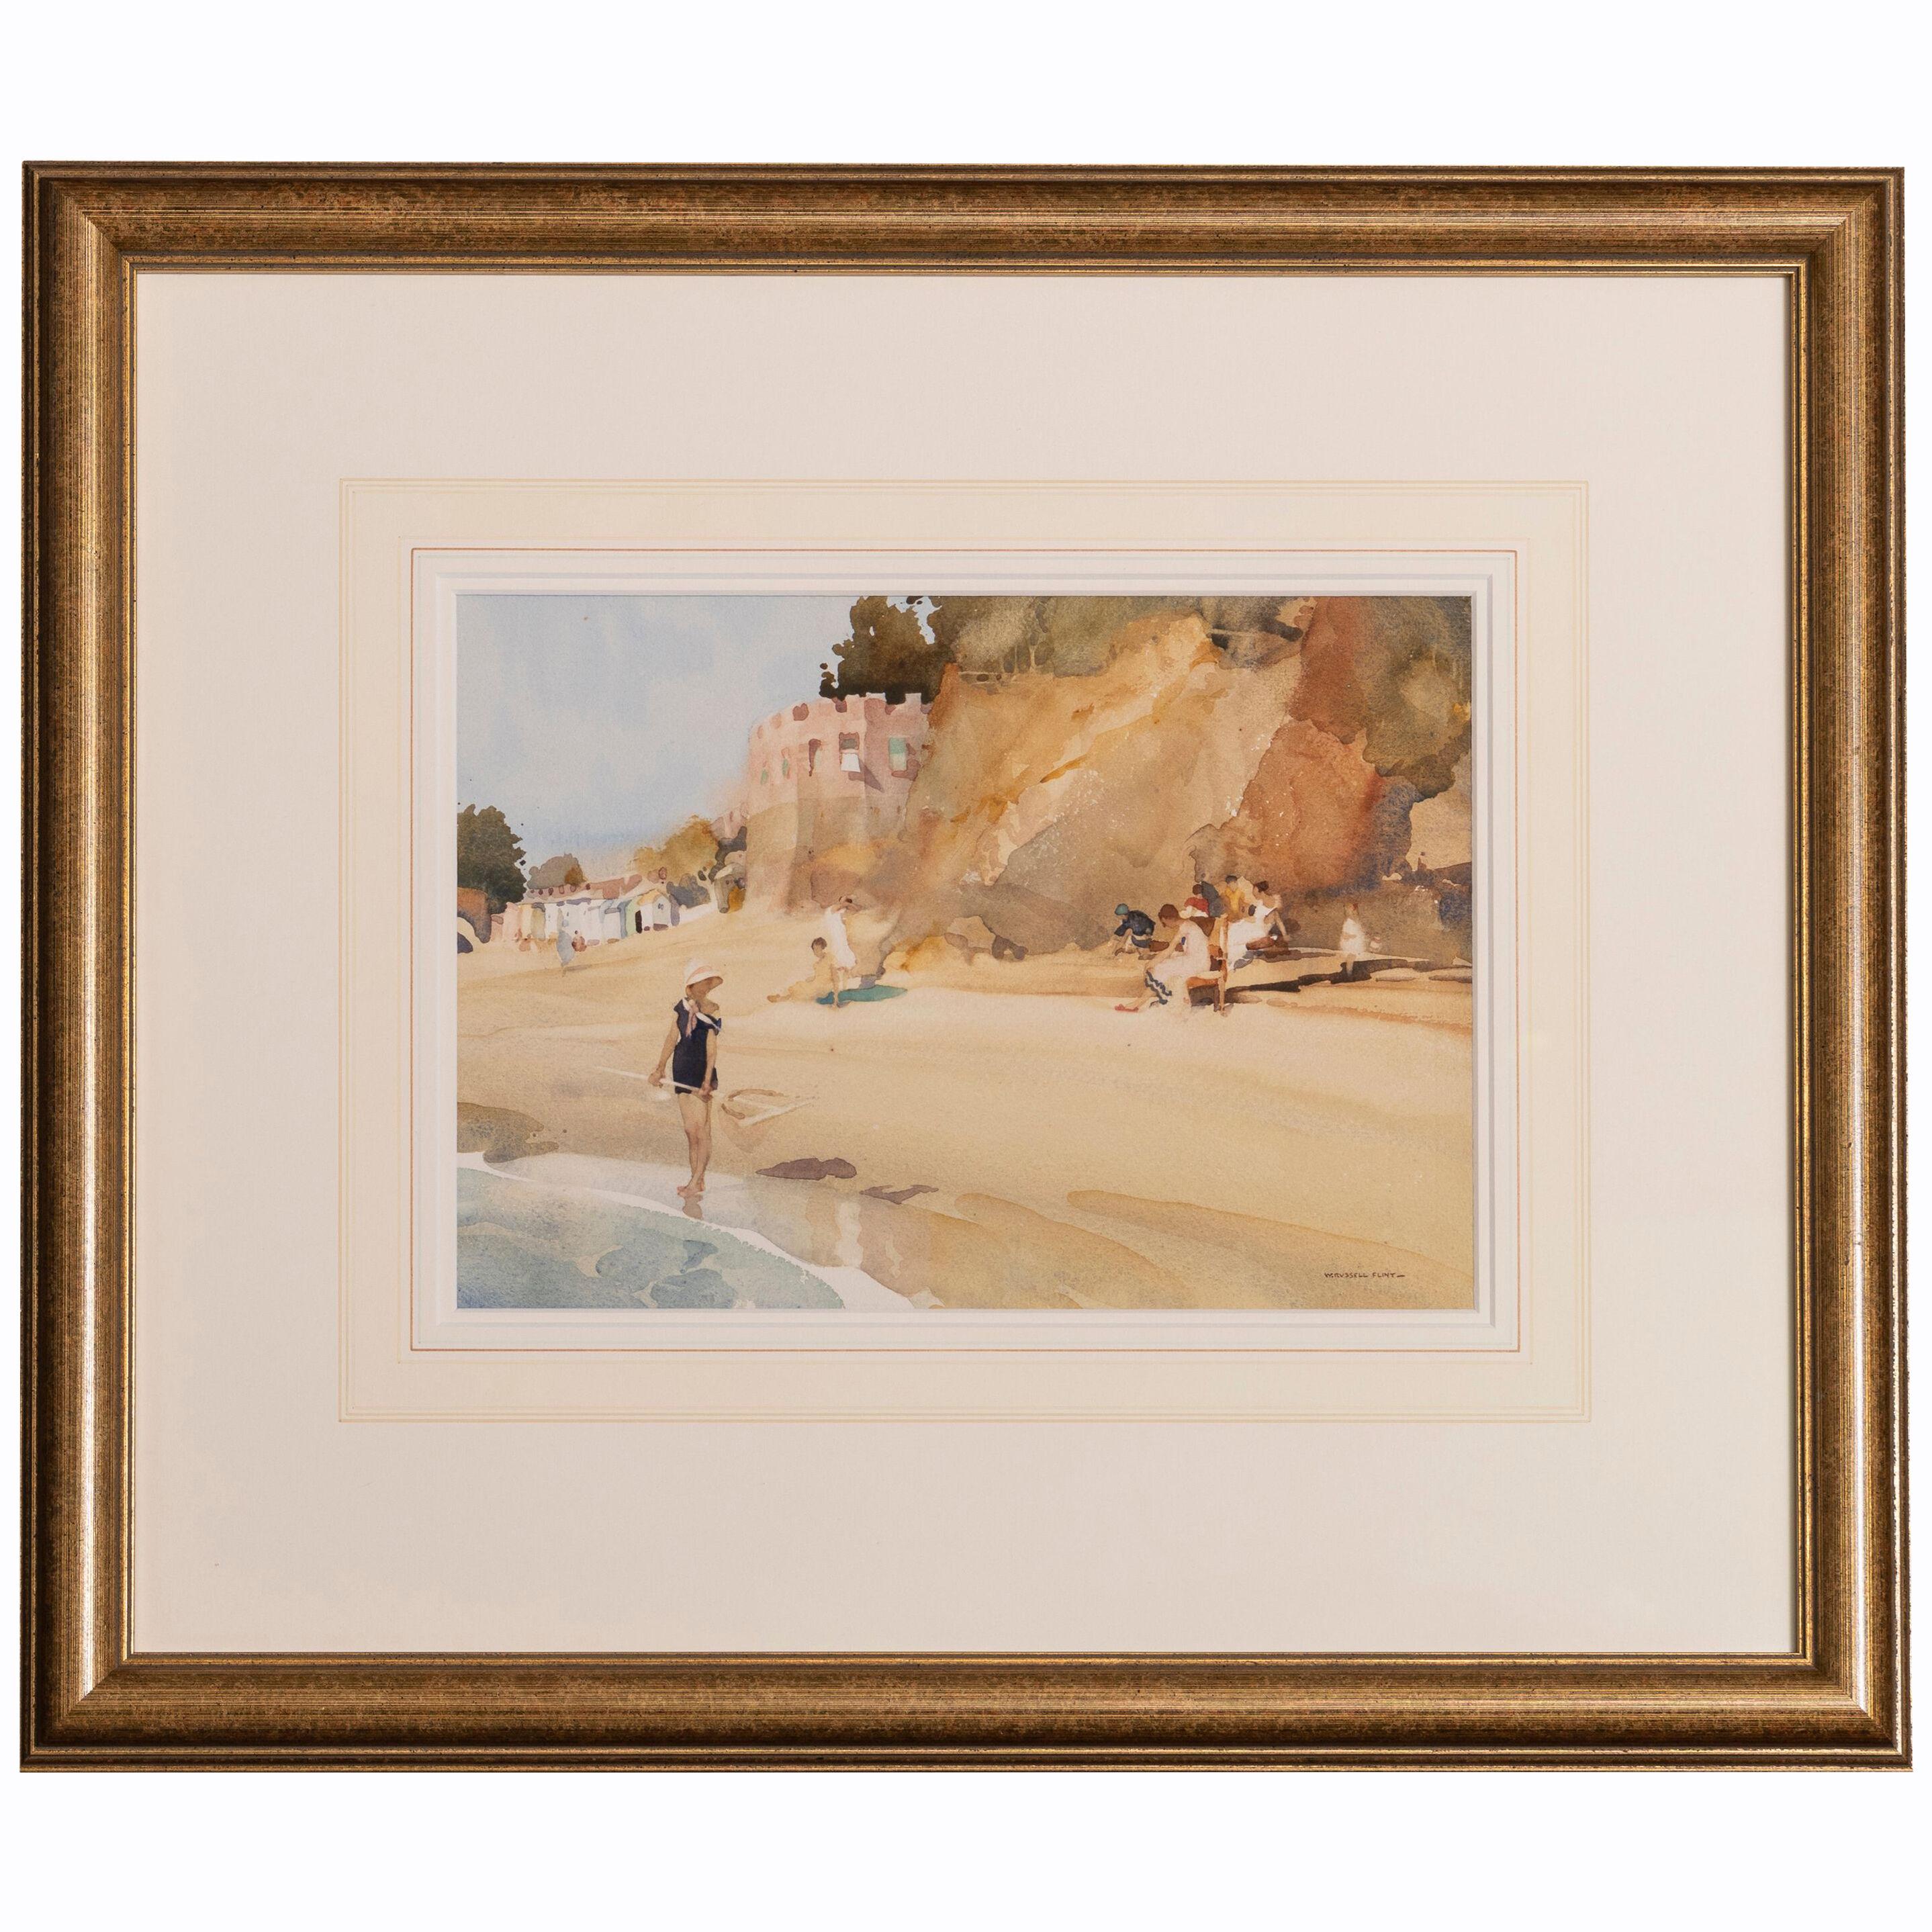 Watercolour painting by Sir William Russell Flint, Scotland circa 1948